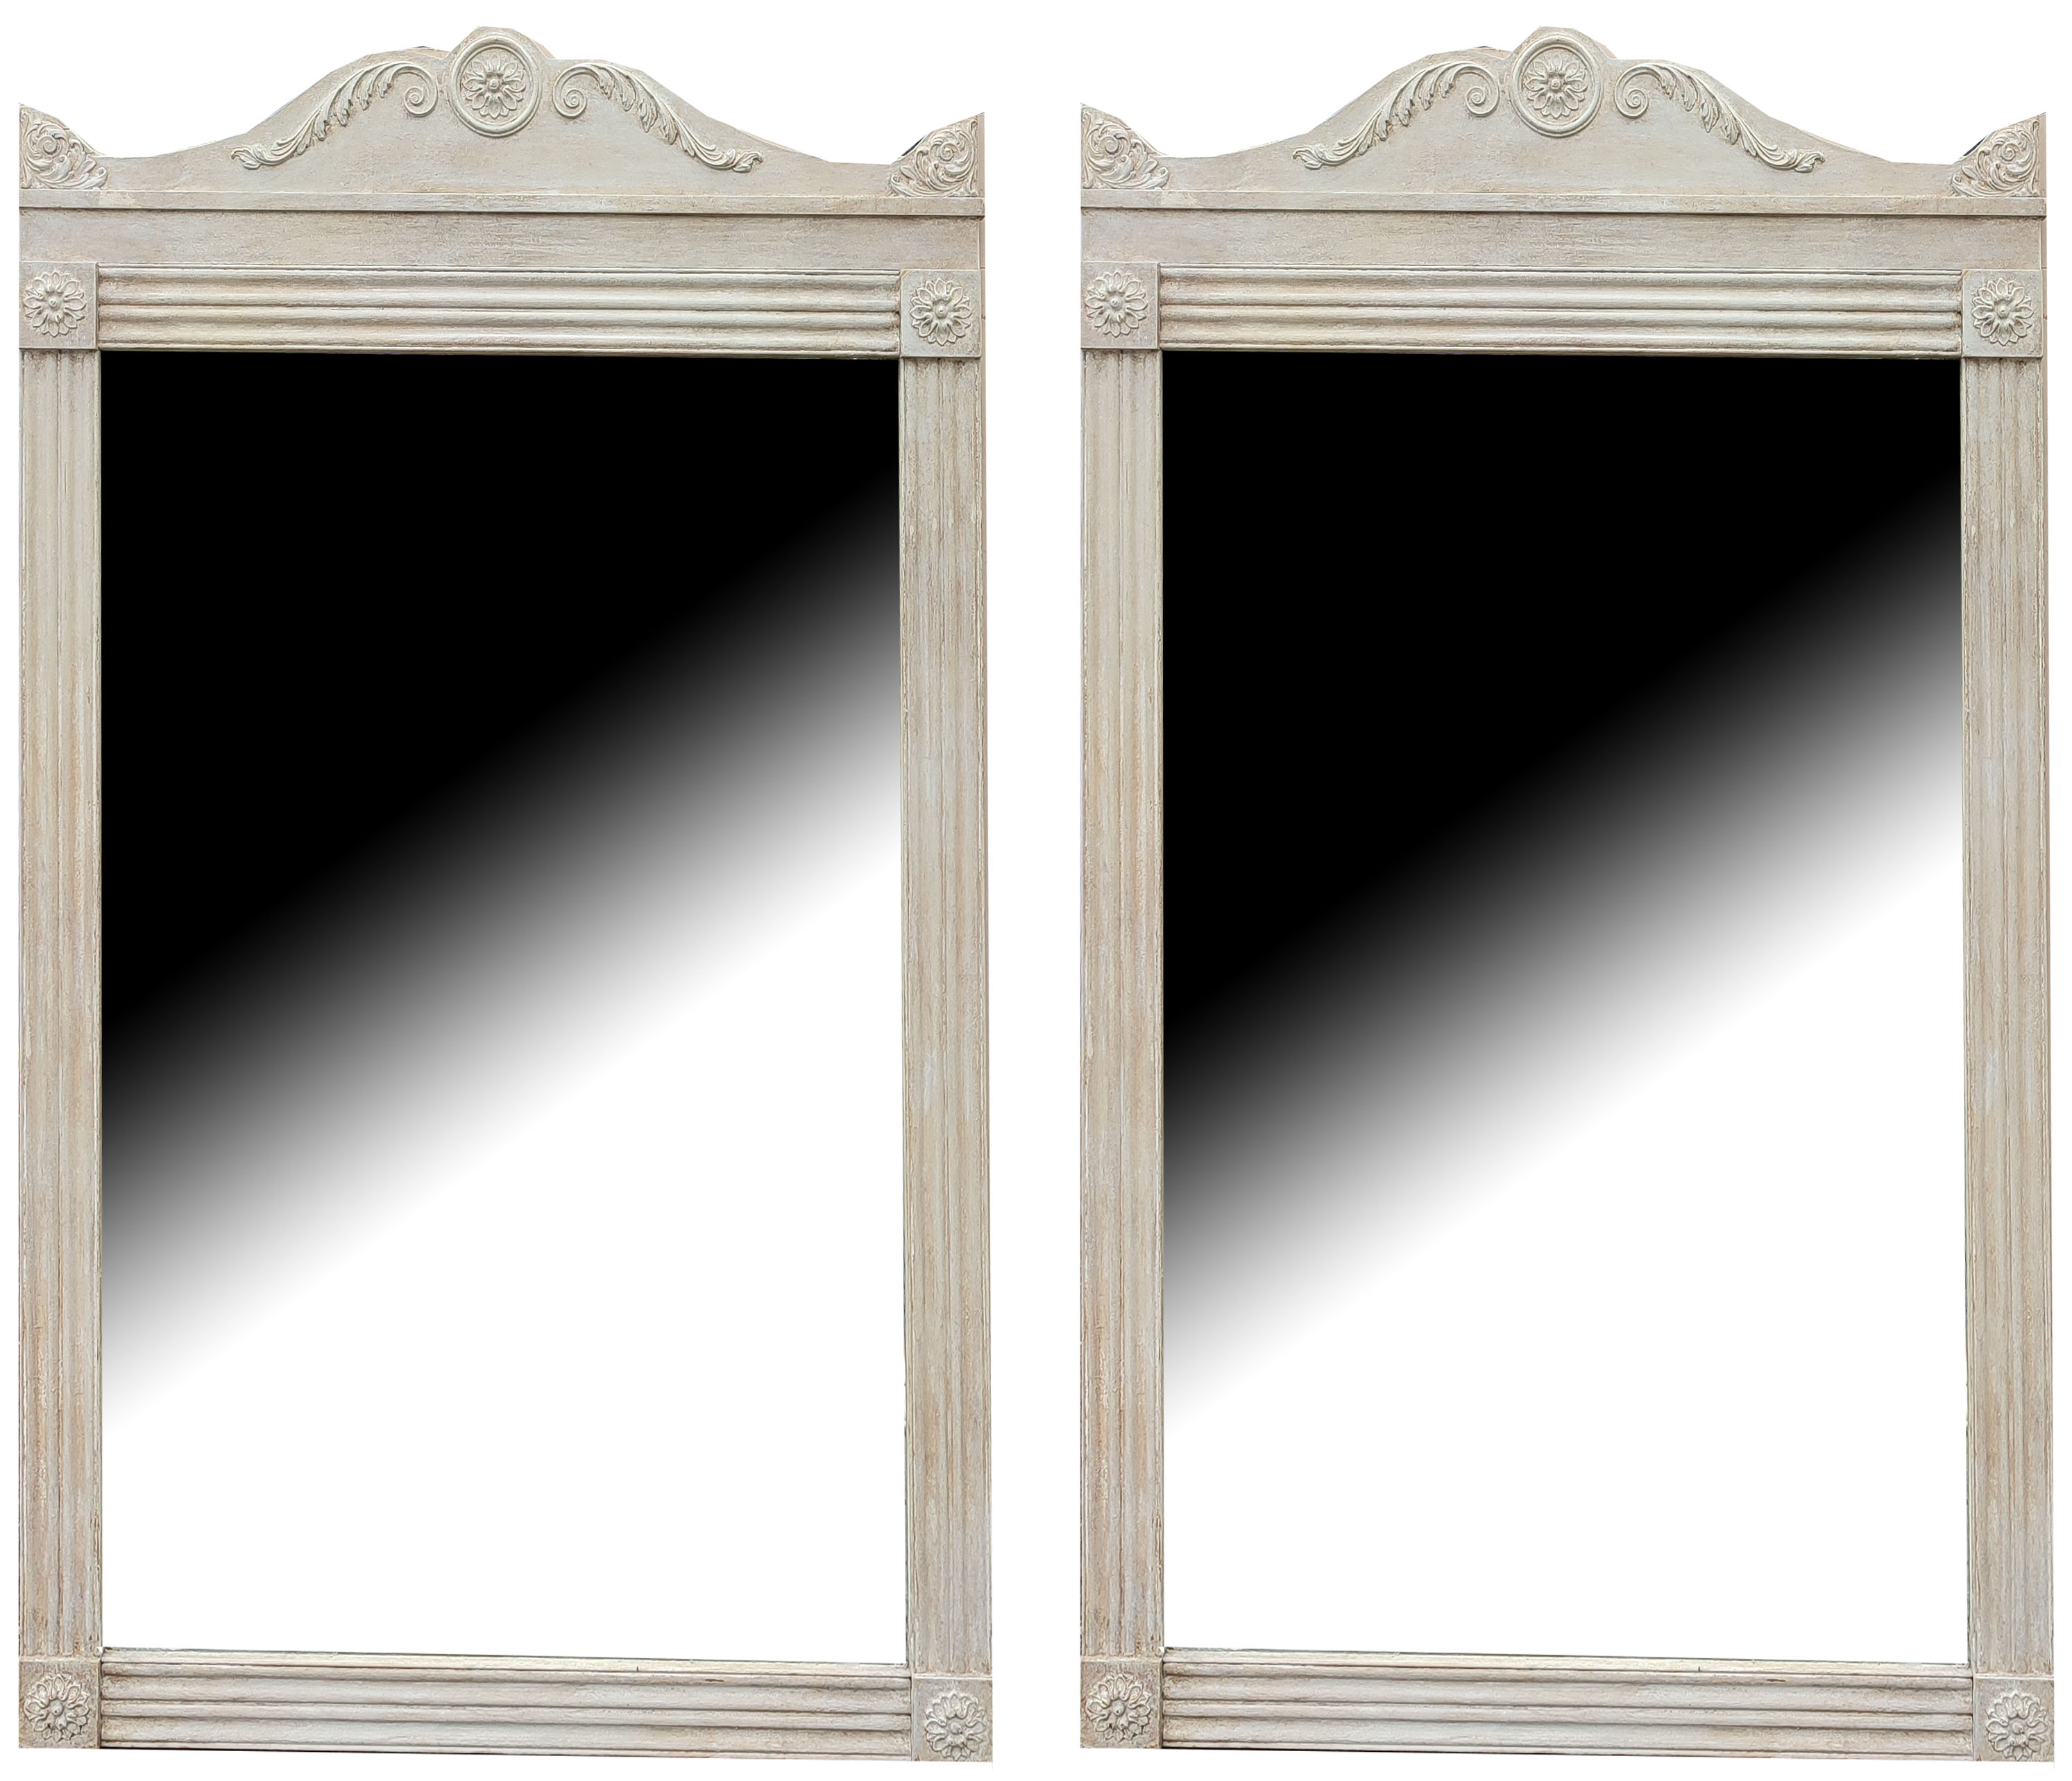 A PAIR OF REGENCY STYLE MIRRORS With serpentine cartouche above a bevelled silver plate. (76cm x